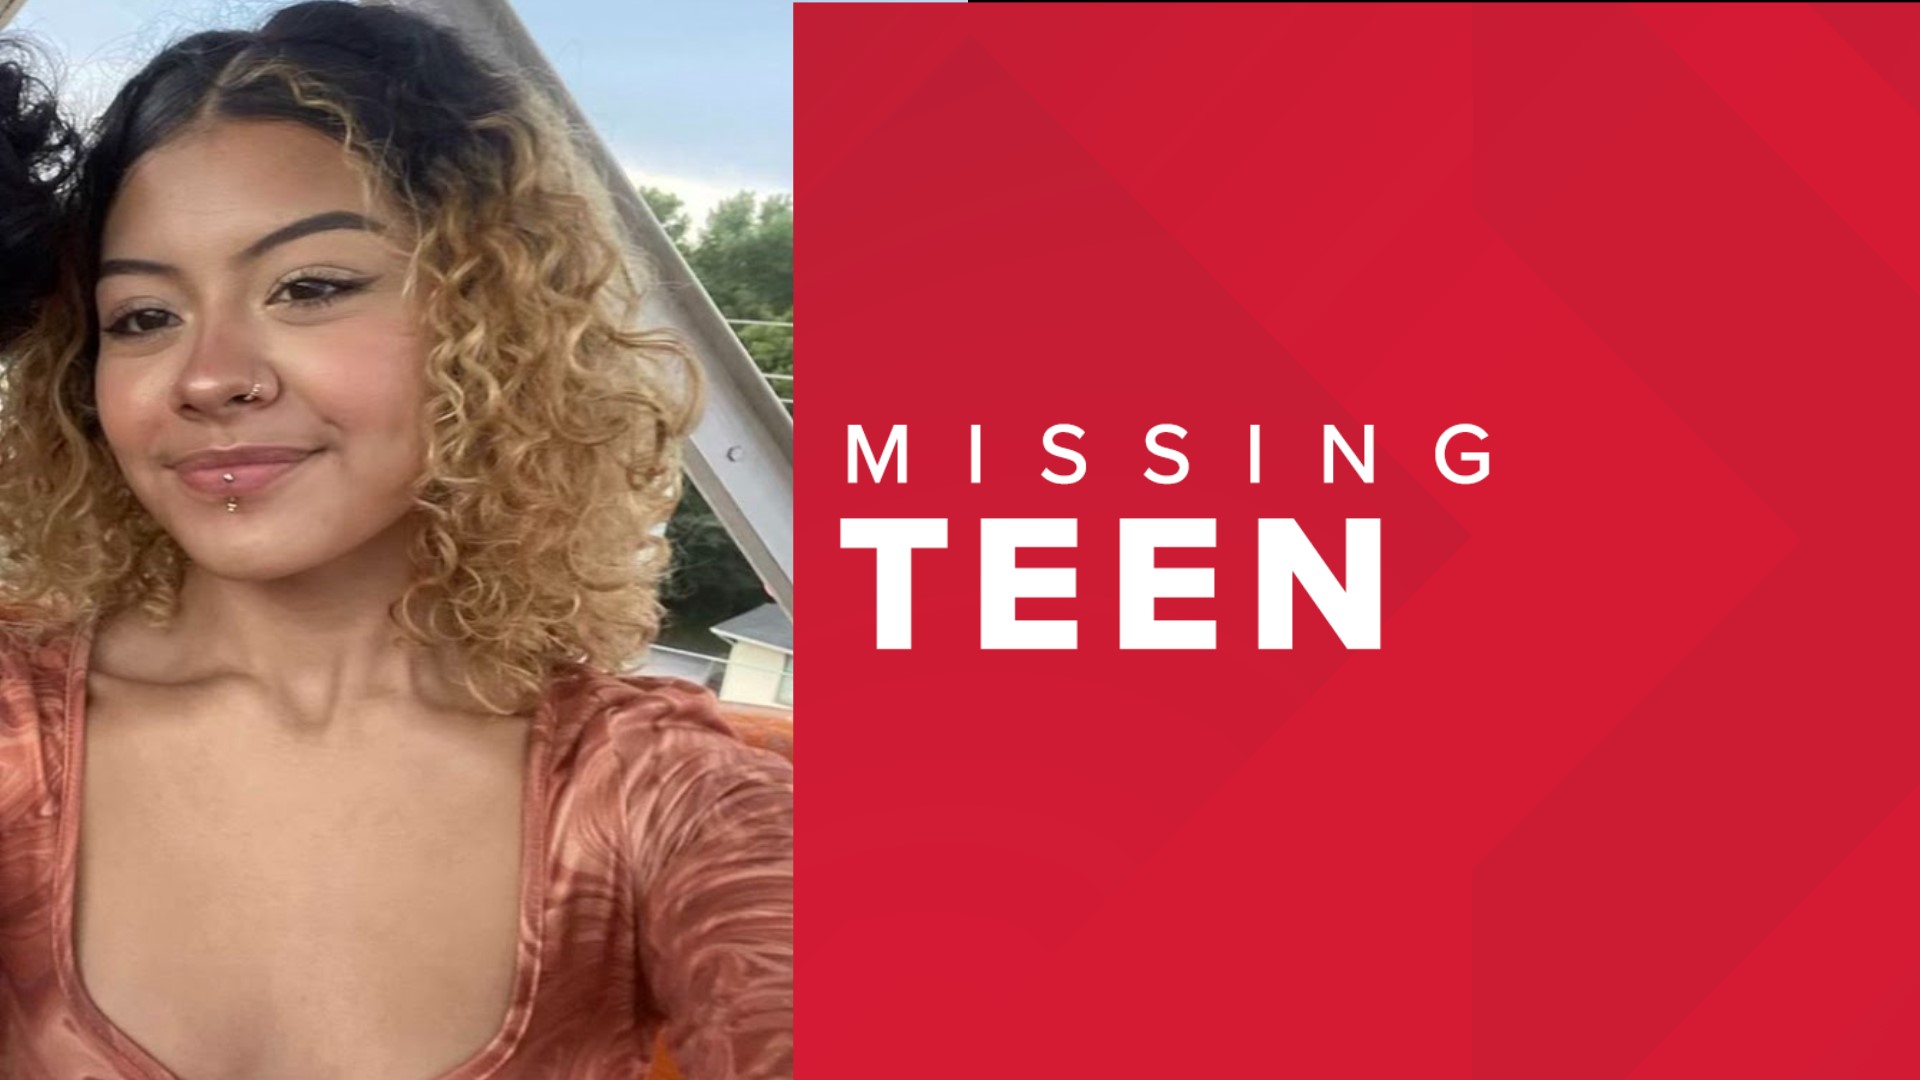 Susana Morales, 16, was last seen by her mother on July 26 in Norcross, GA.